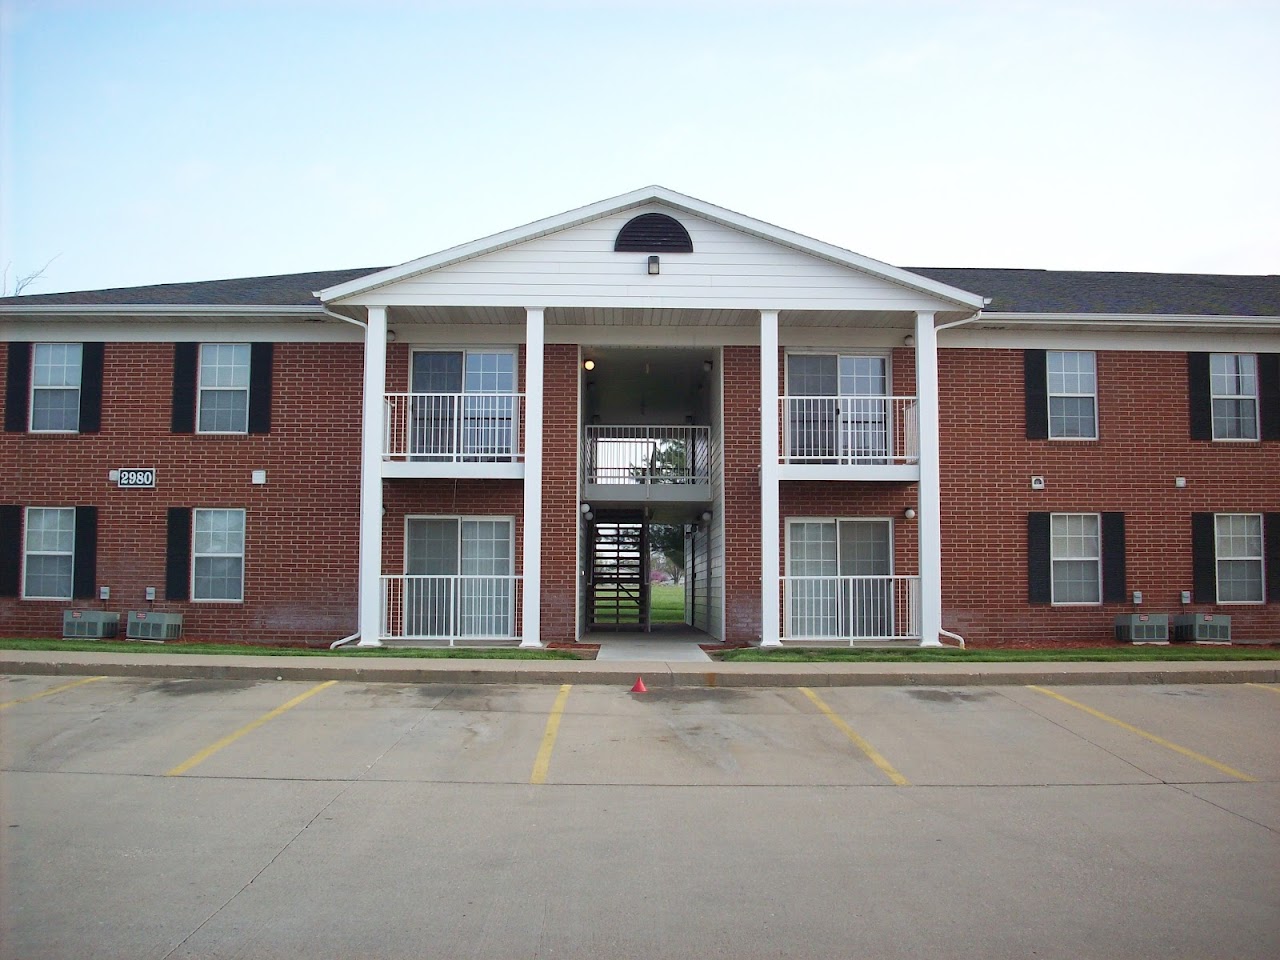 Photo of NEOSHO MEADOWS. Affordable housing located at 2980 LARAMIE LN NEOSHO, MO 64850